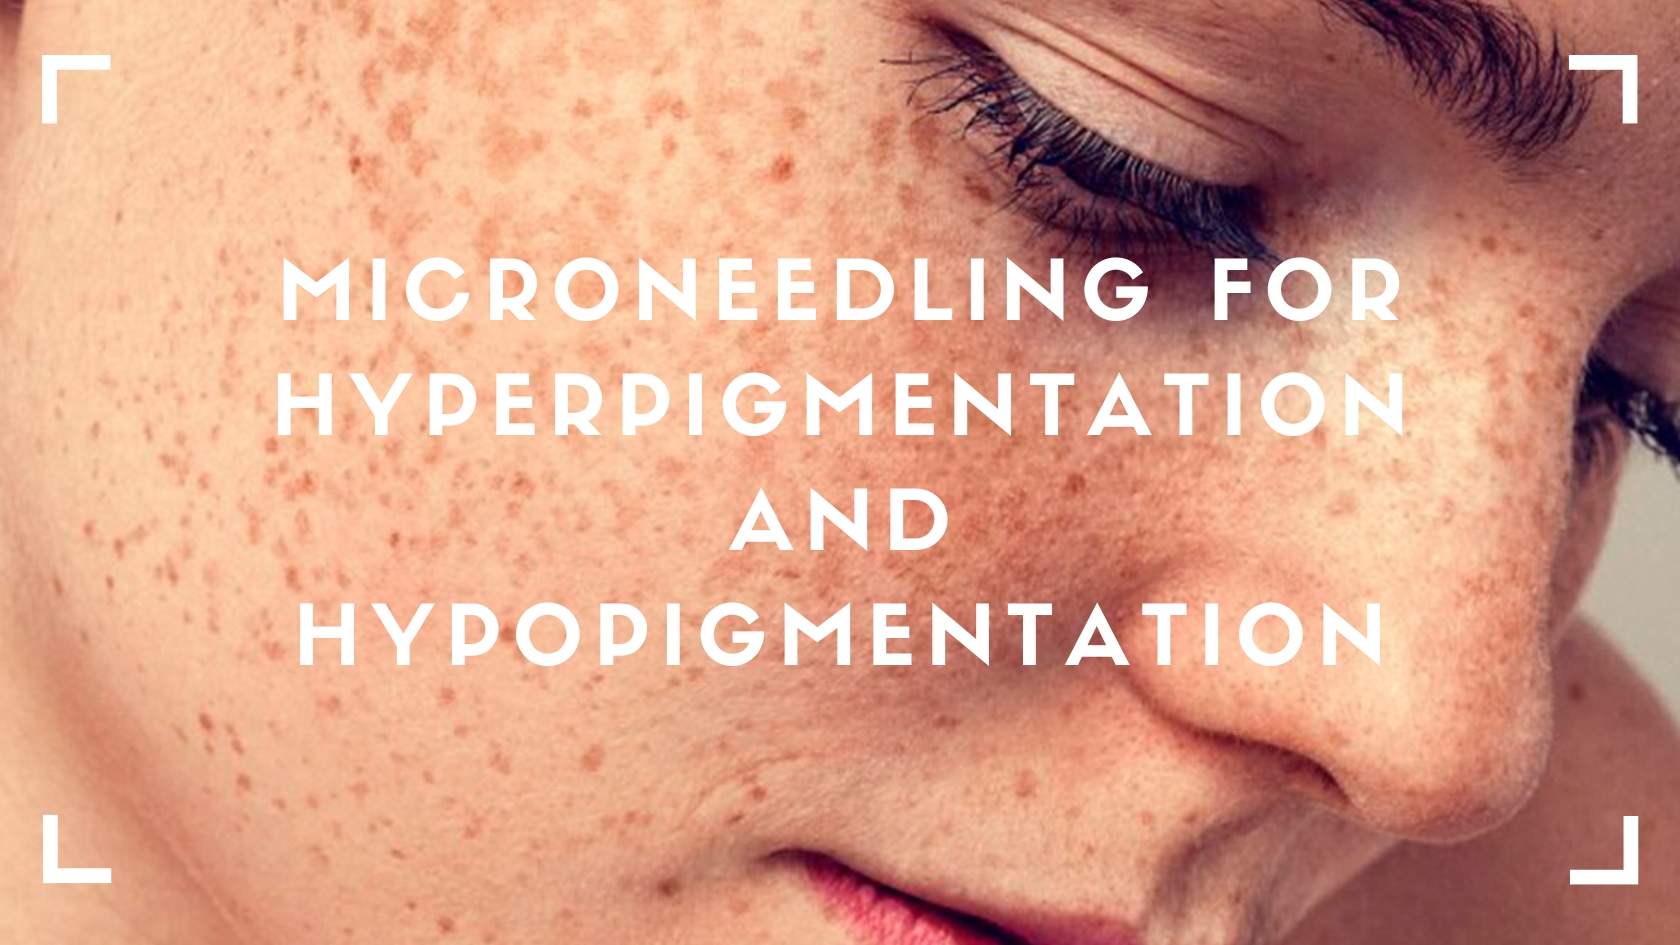 Microneedling for Hyperpigmentation and Hypopigmentation